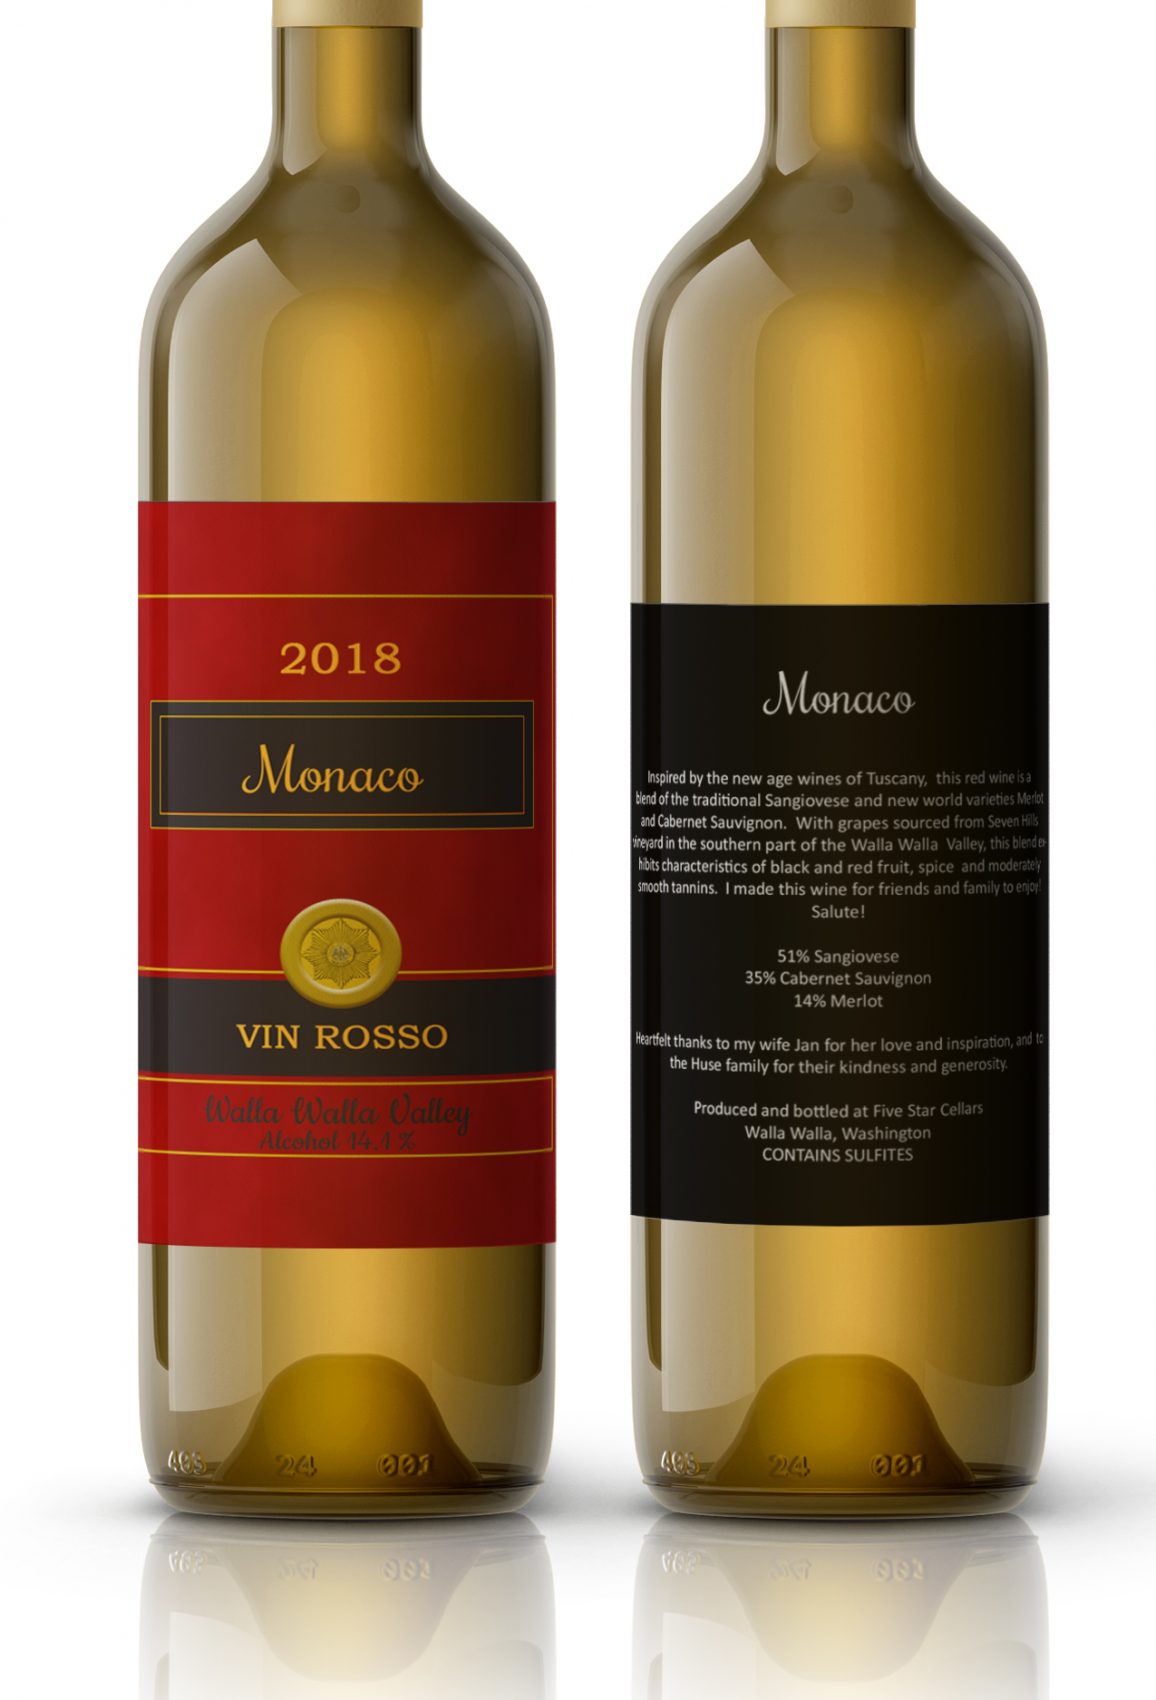 Custom wine labels; front and back labels on a 750 ml wine bottle.